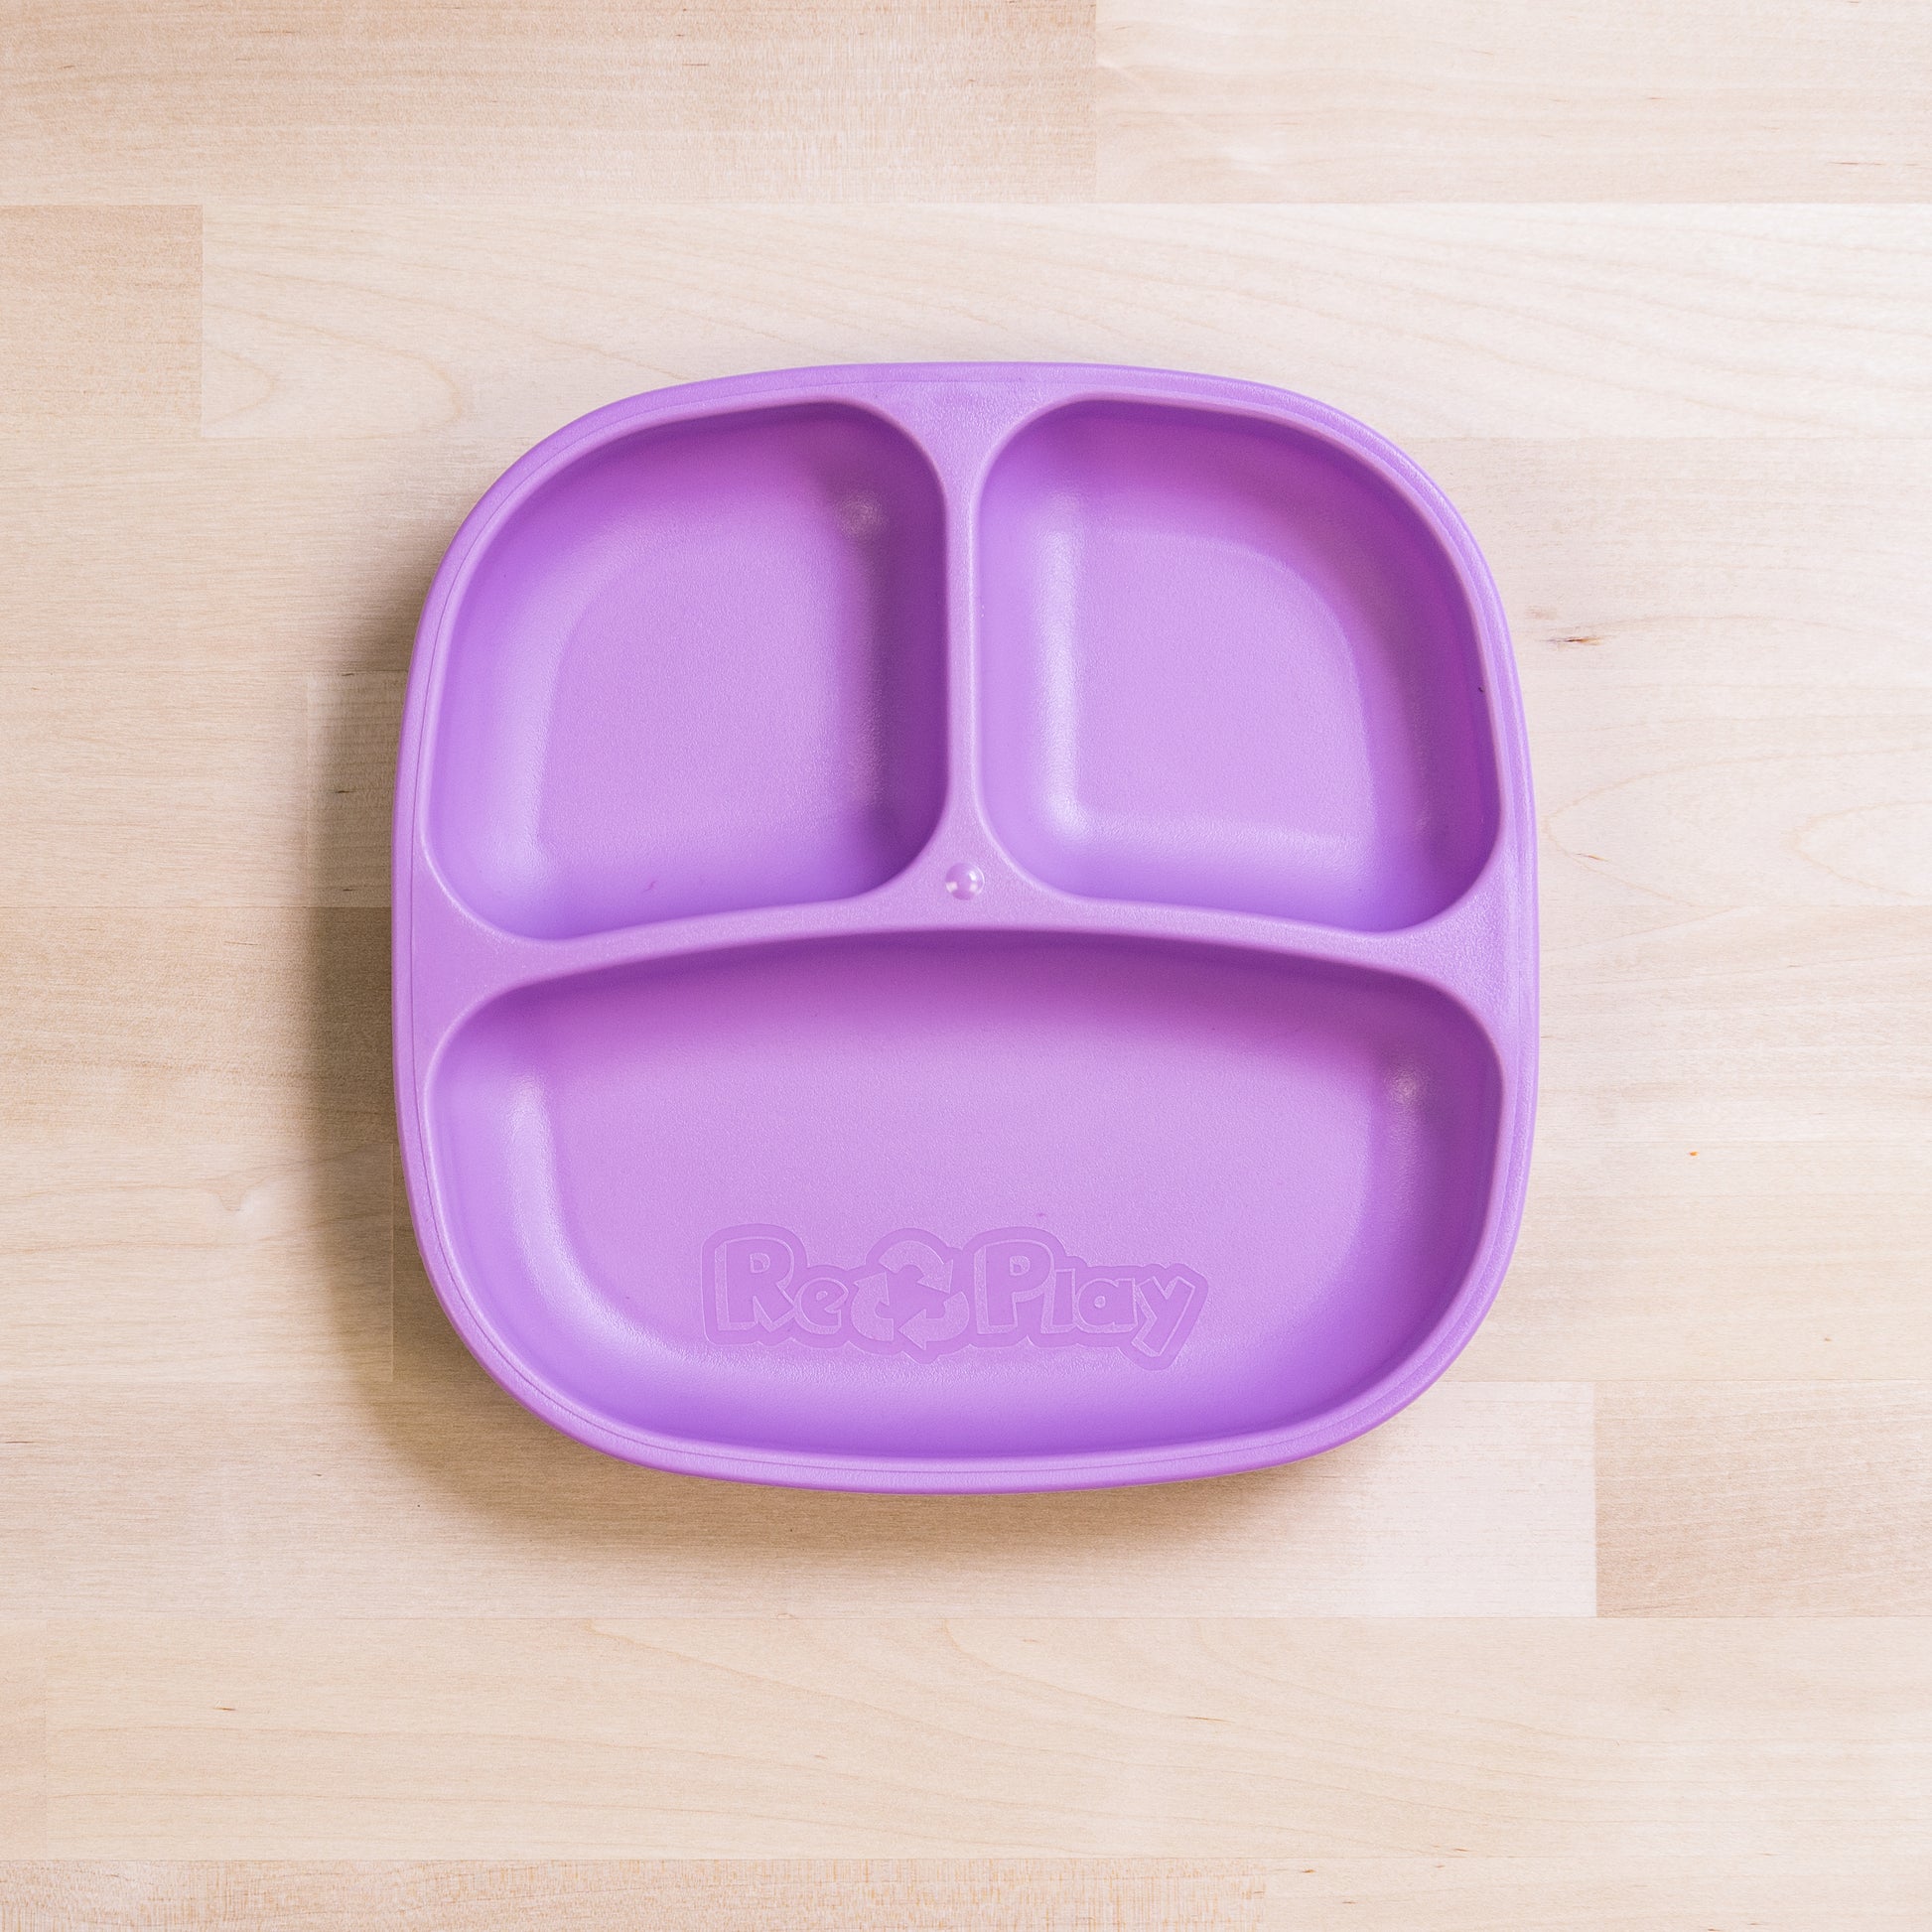 Re-Play Divided Plate 7" plate in Purple from Bear & Moo